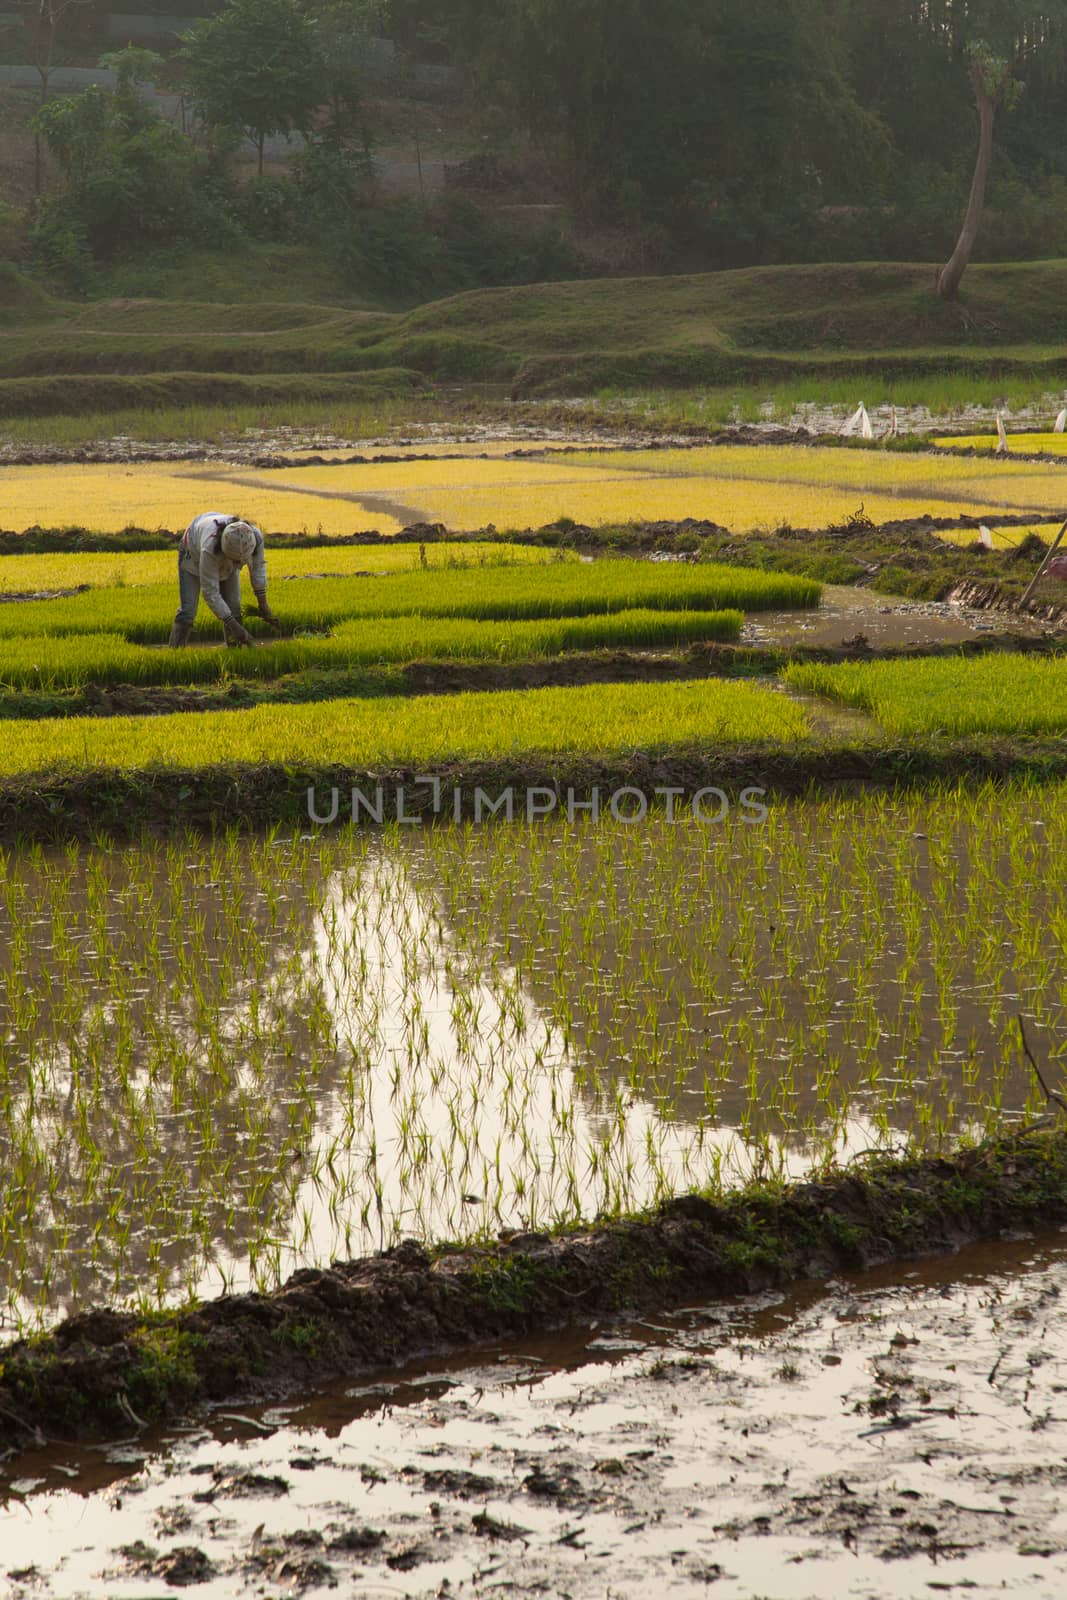 Duong Lam Vietnam 22/12/2013 farmer tending crops in fields or paddys with rice growing in open farmland with irrigation channels. High quality photo